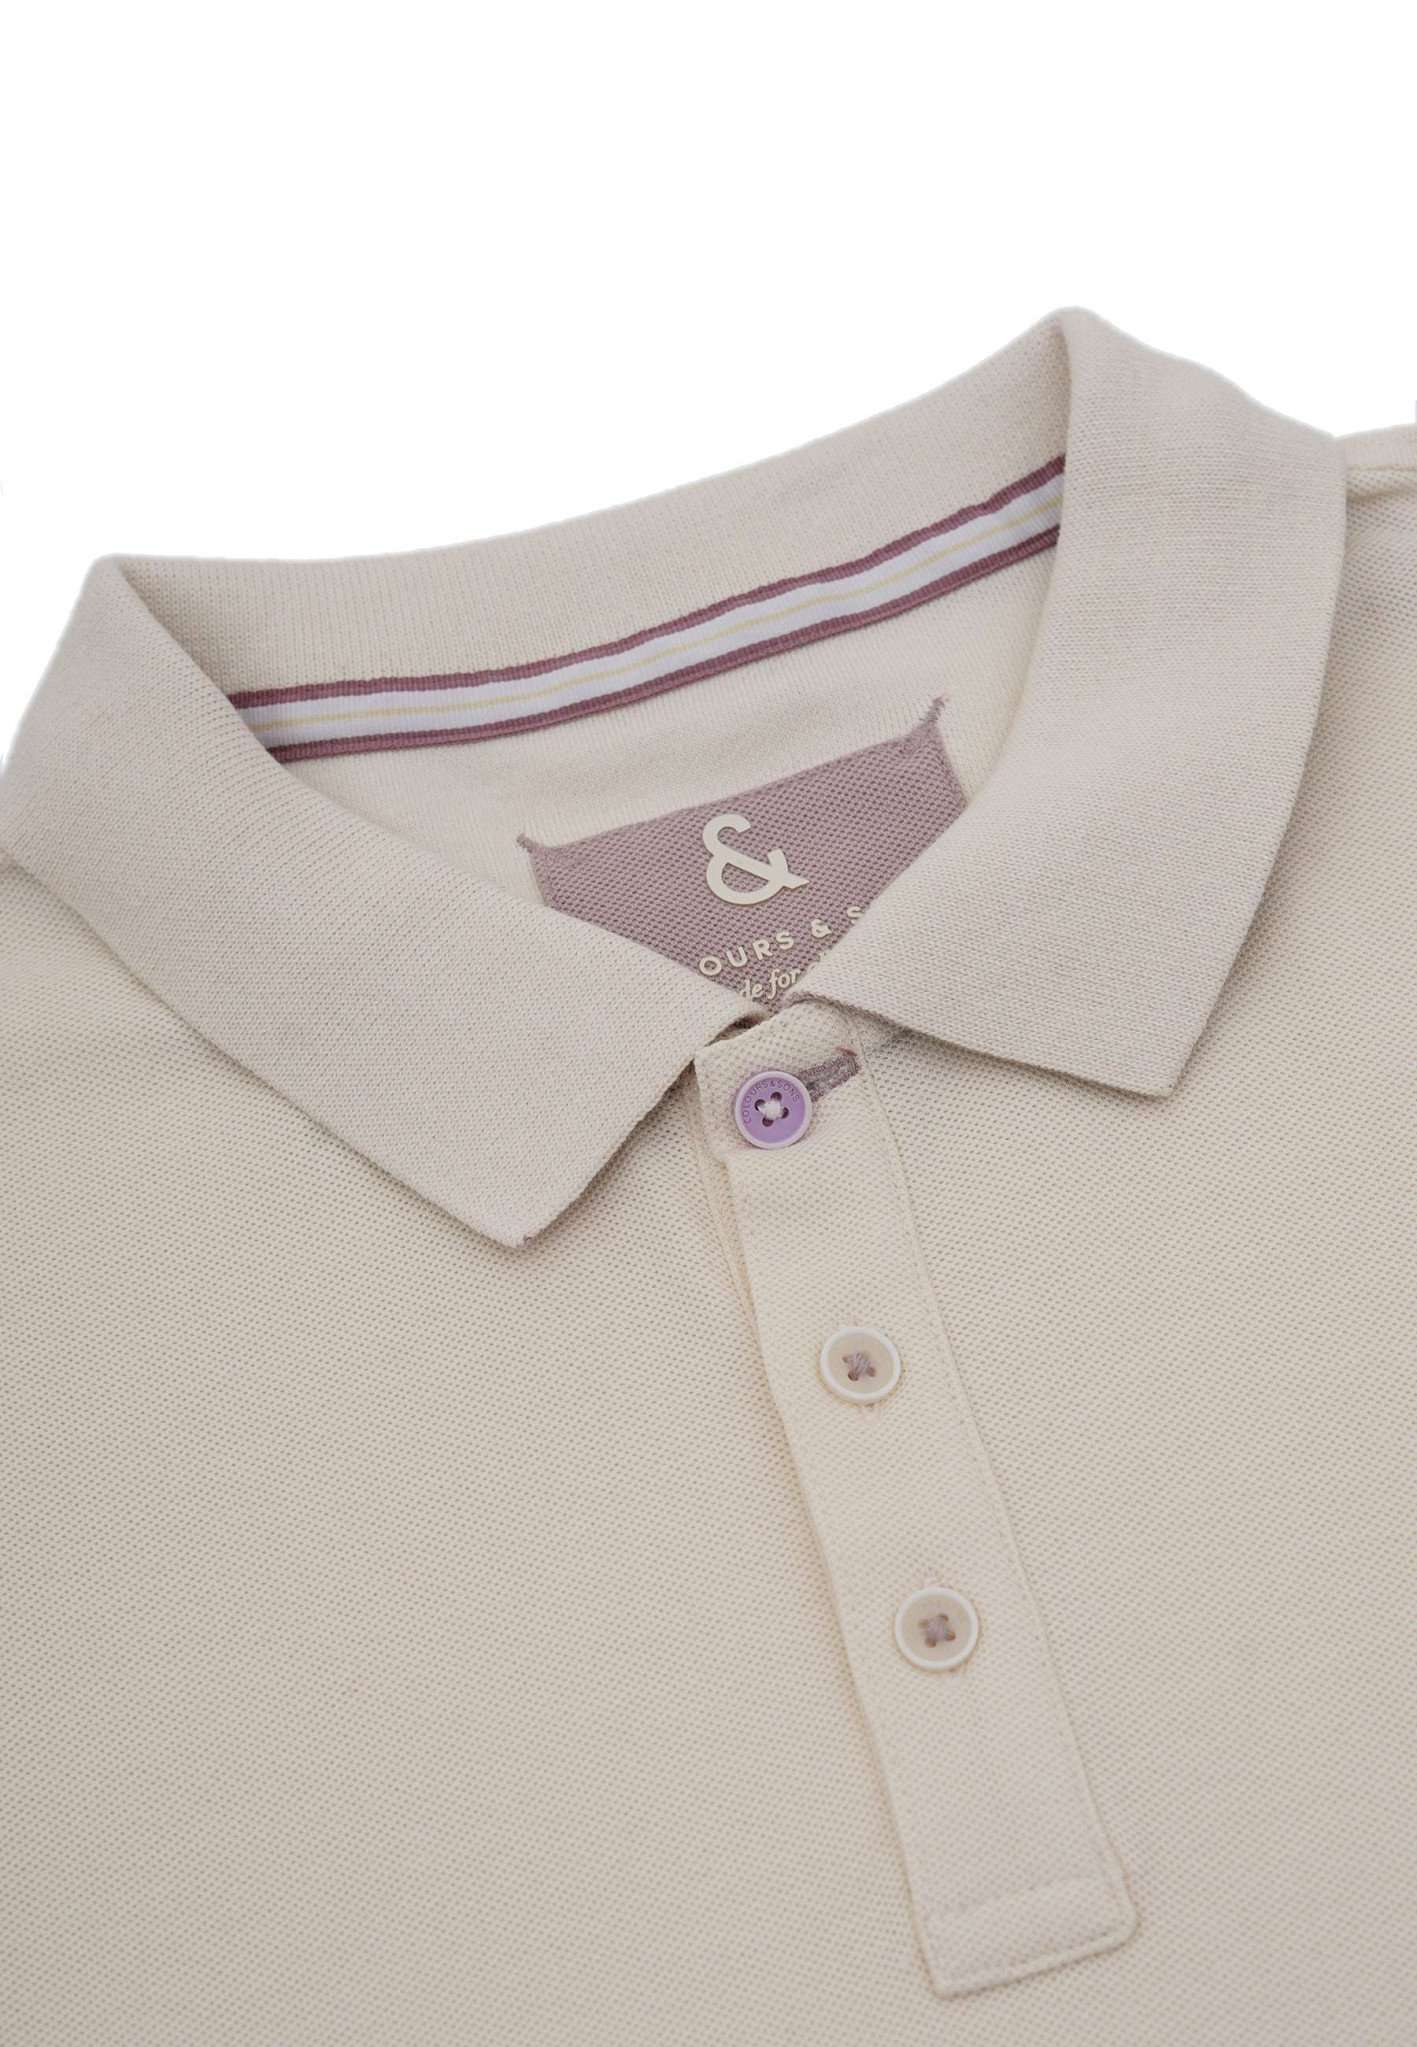 Polo Embroidery in Offwhite Polos Colours and Sons   